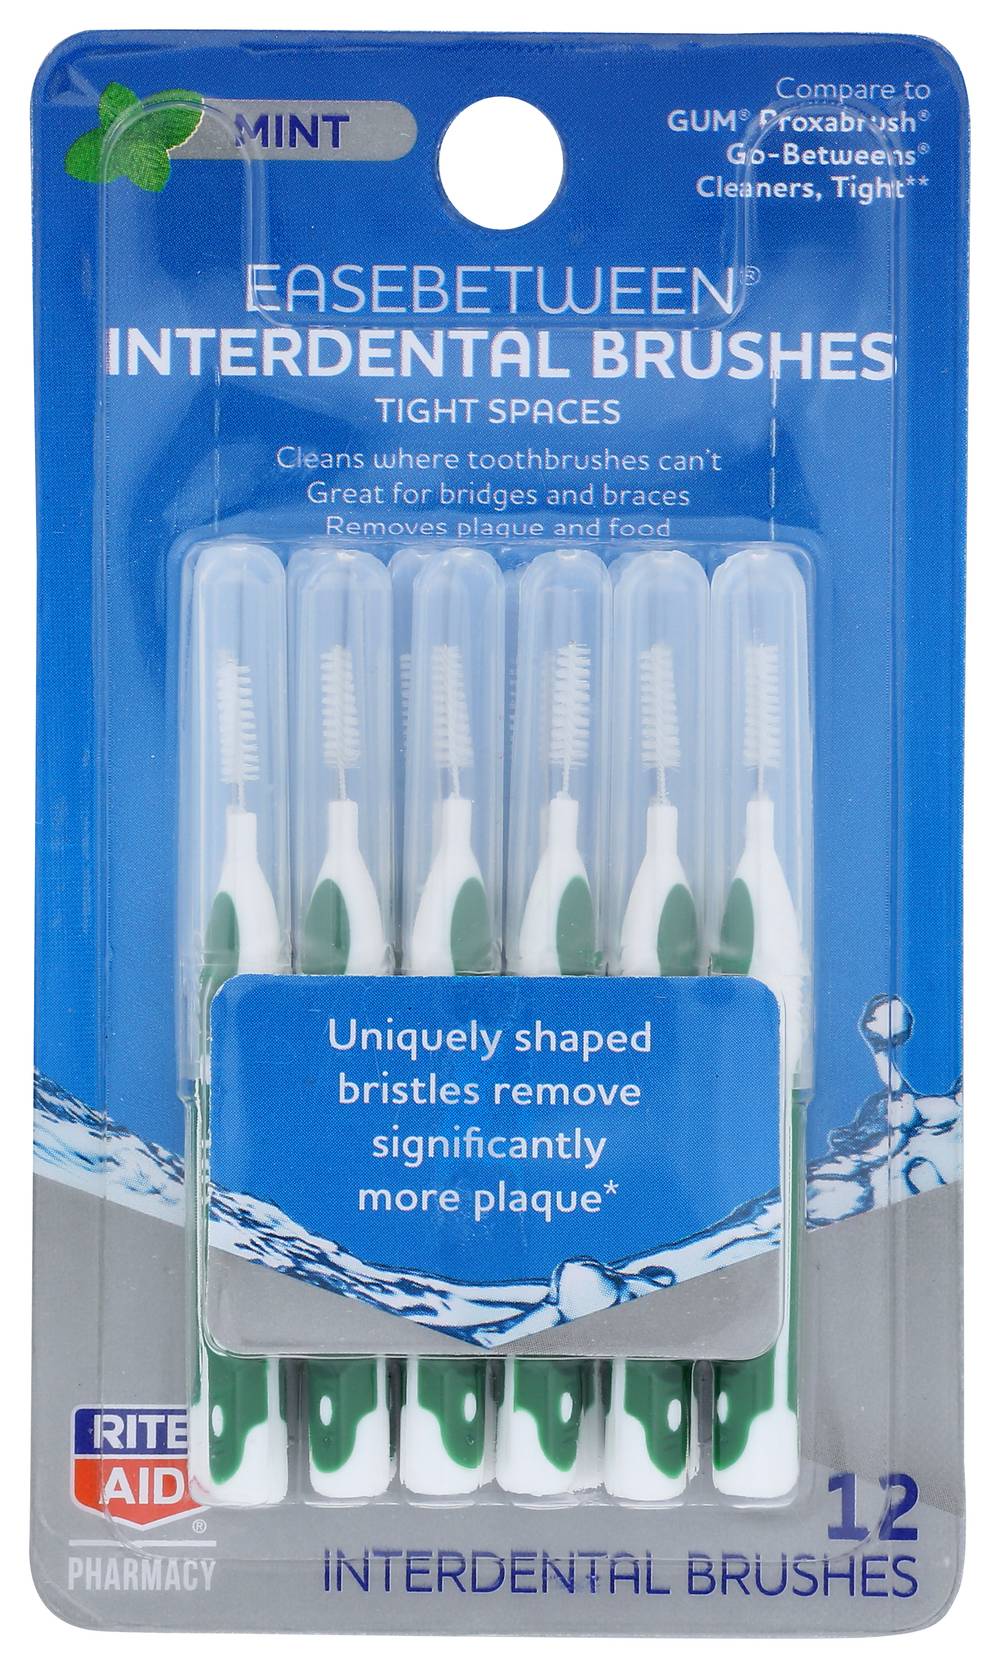 Rite Aid Interdental Brushes Mint (12 ct)